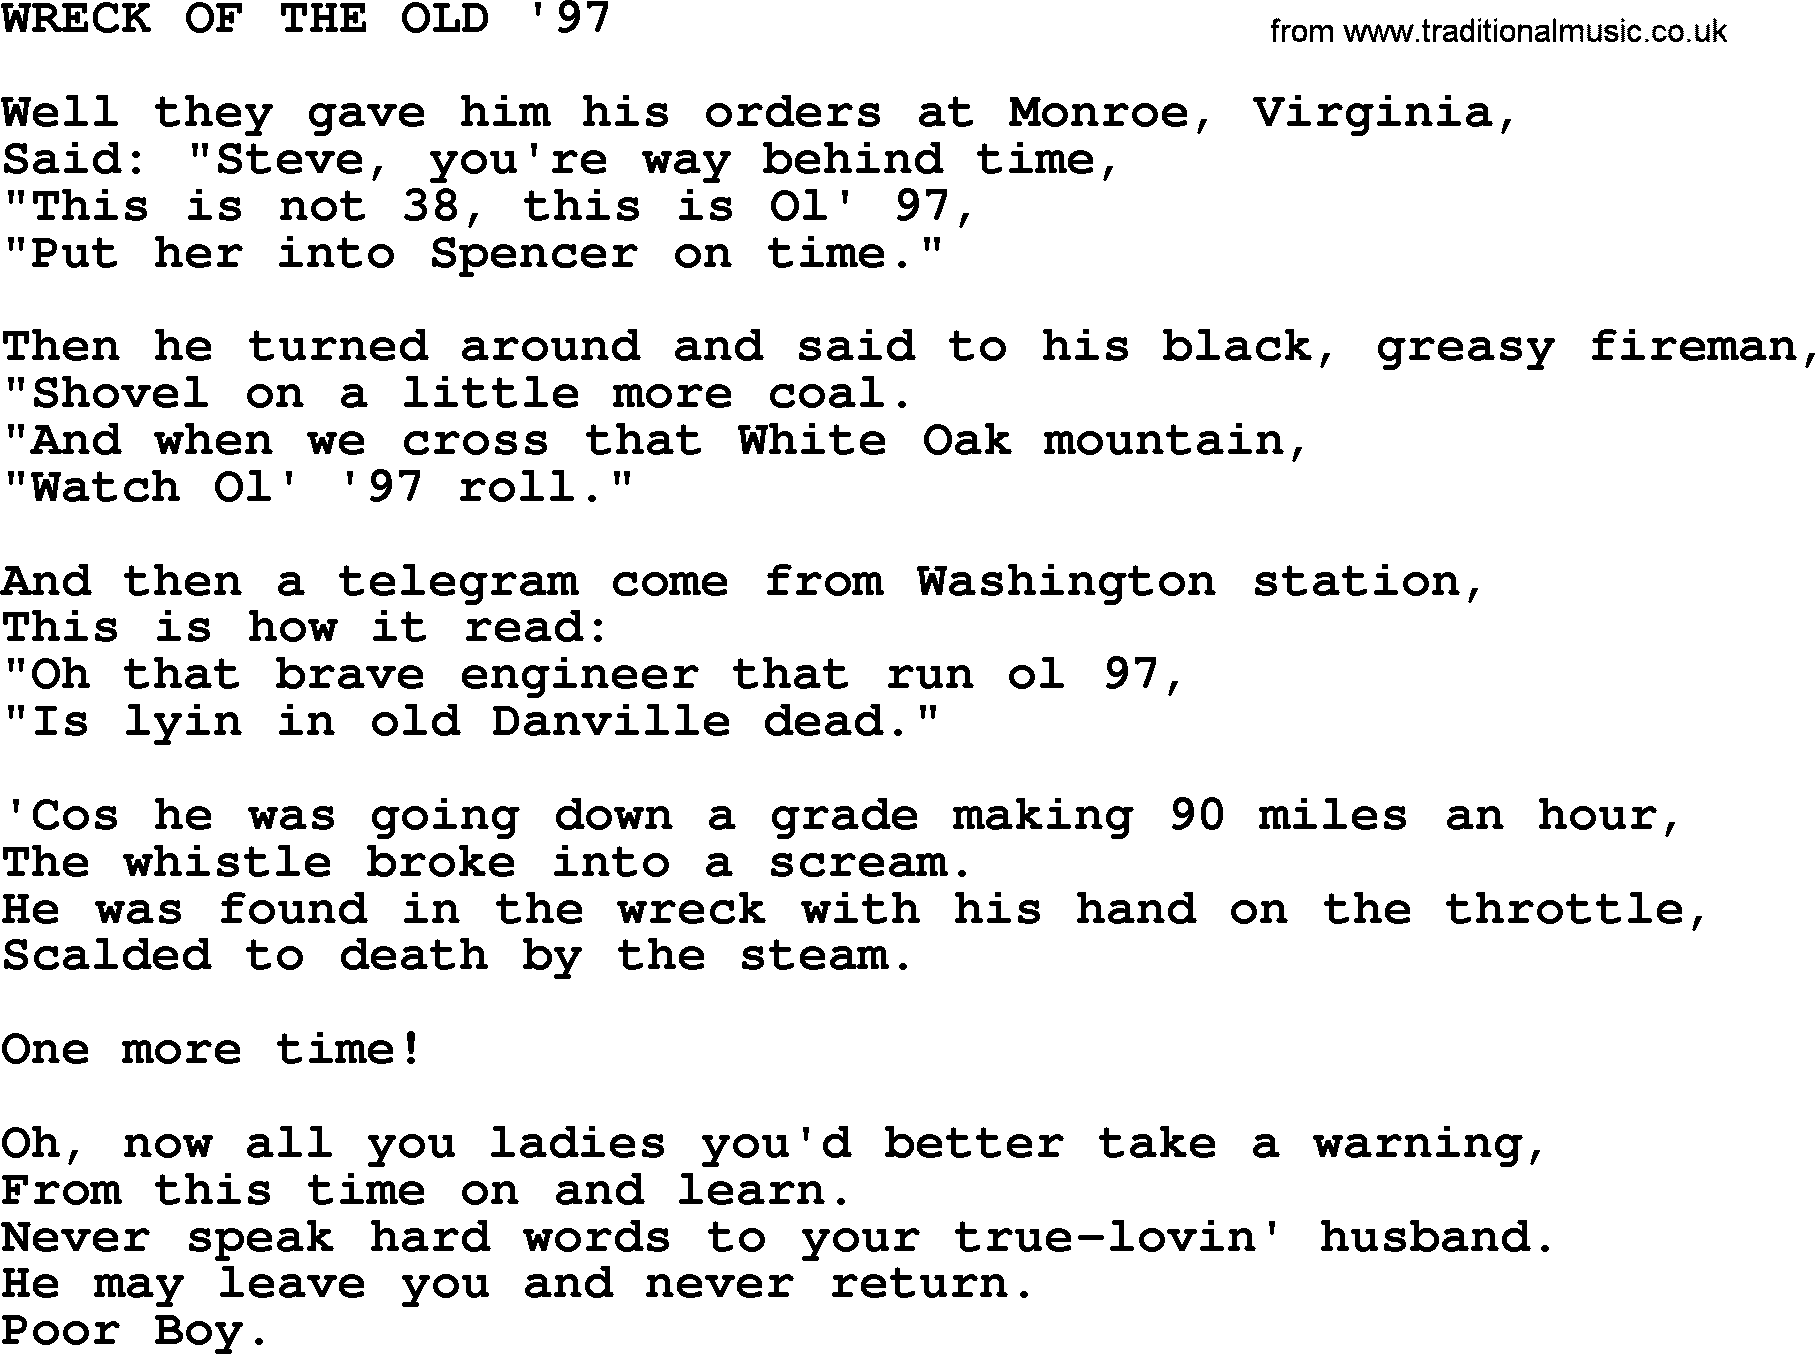 Johnny Cash song Wreck Of The Old '97.txt lyrics